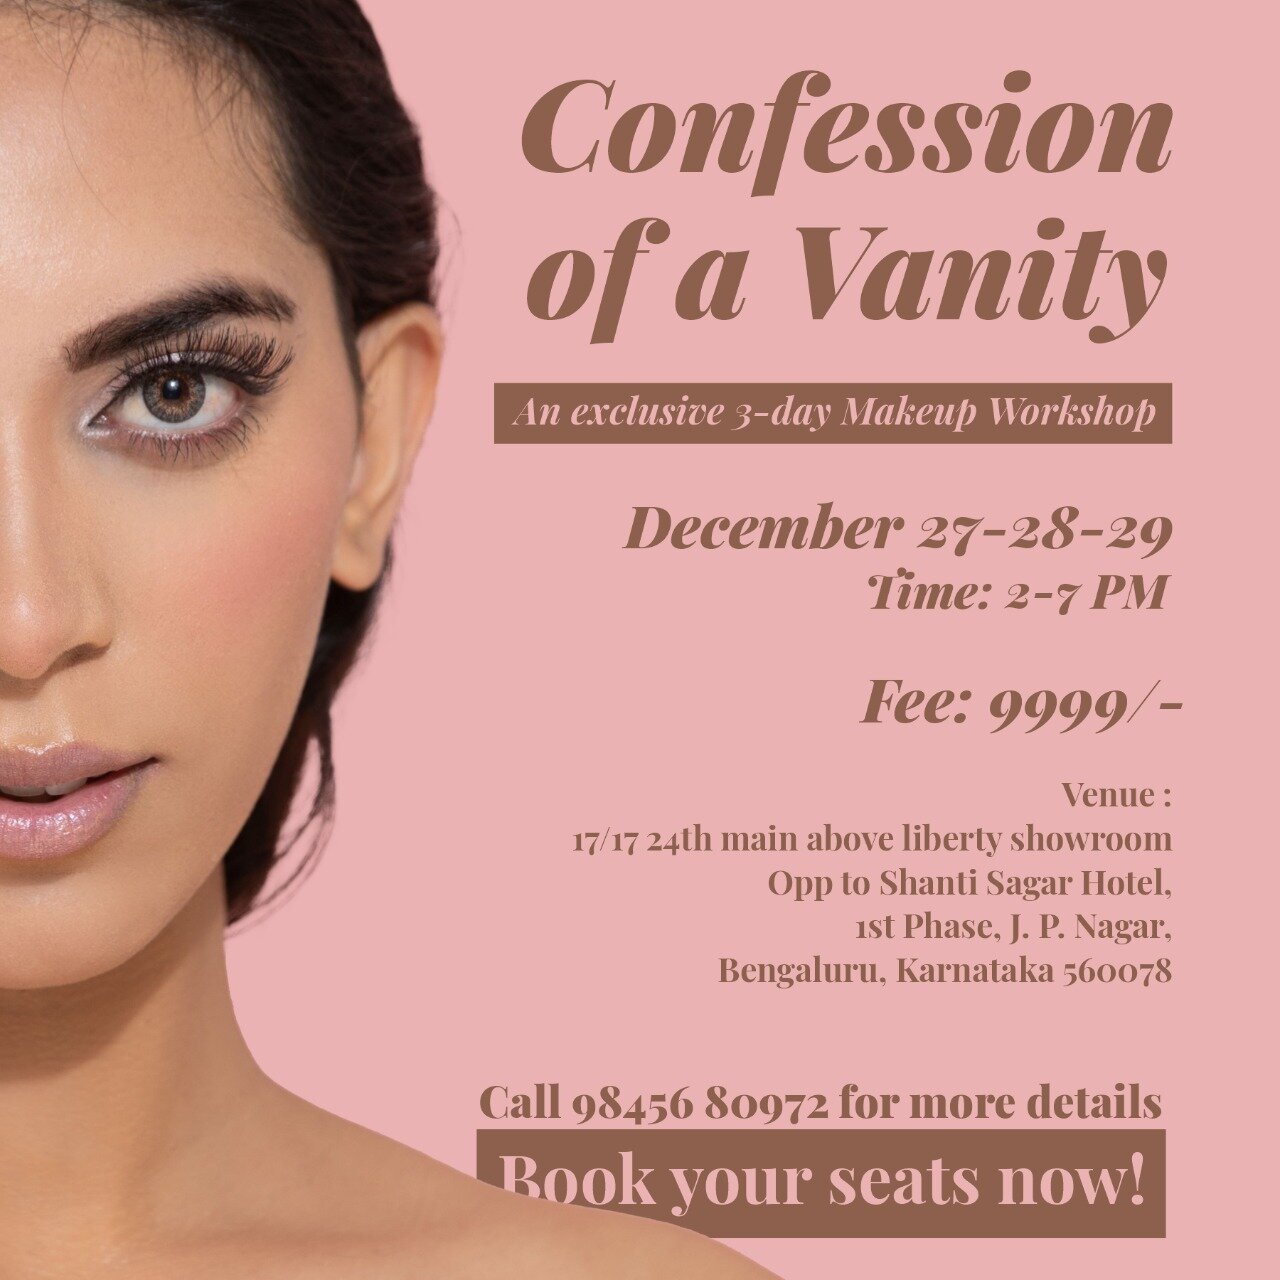 Confession of a Vanity - An Exclusive 3 day Makeup Workshop, Bangalore, Karnataka, India